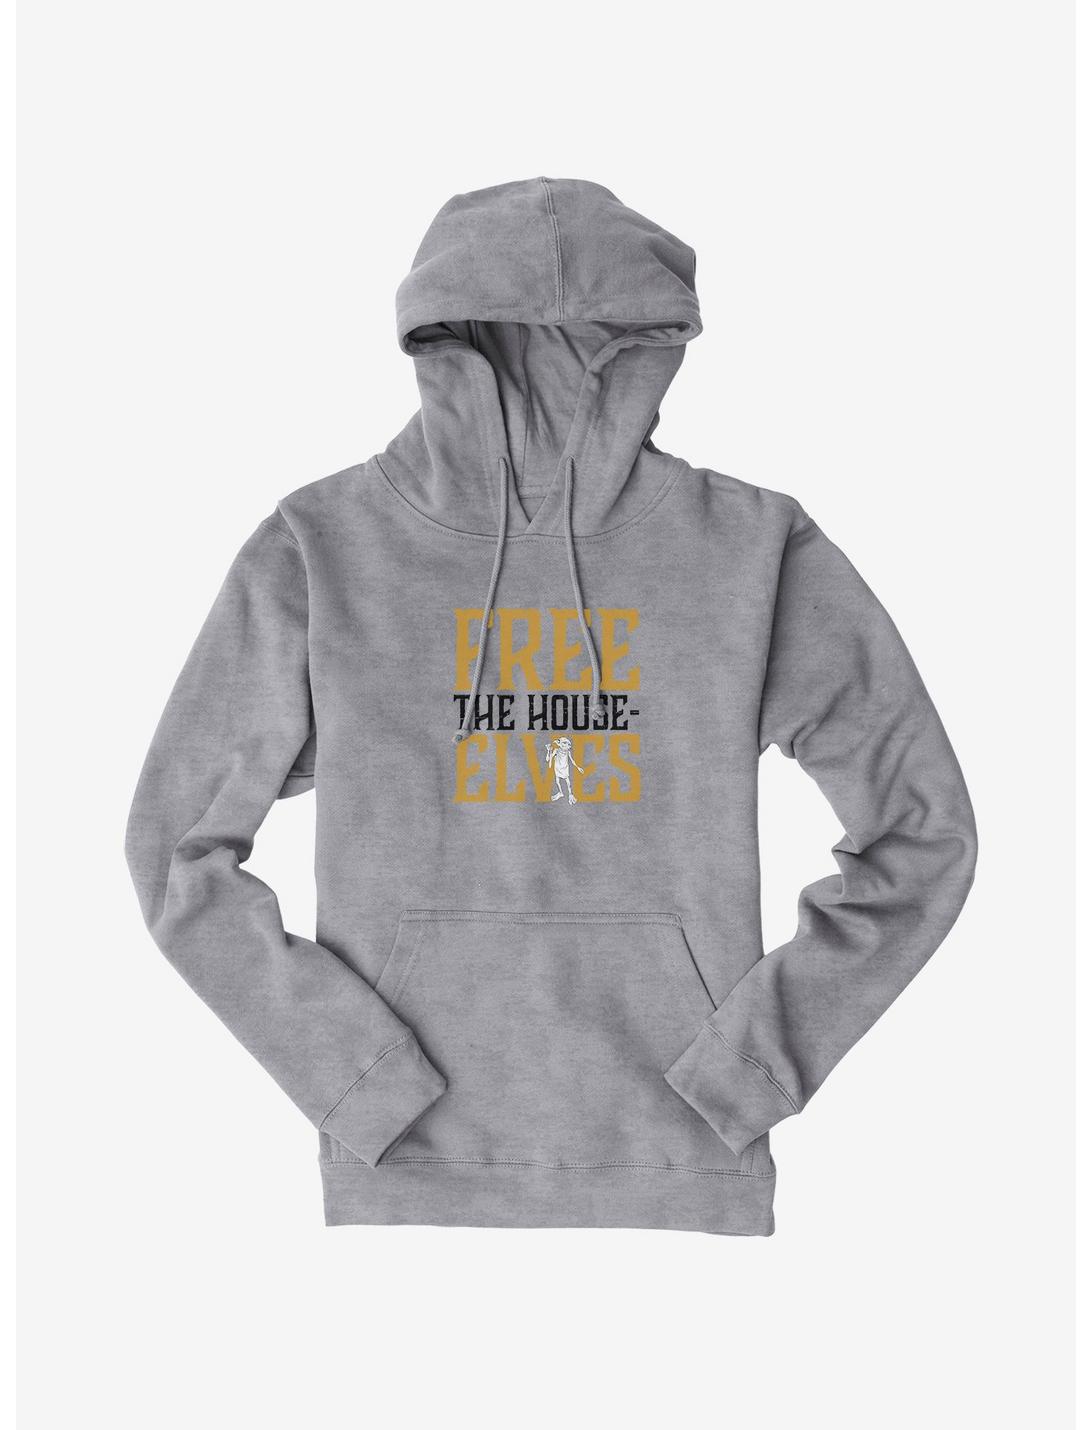 Harry Potter Free The House Elves Hoodie, , hi-res